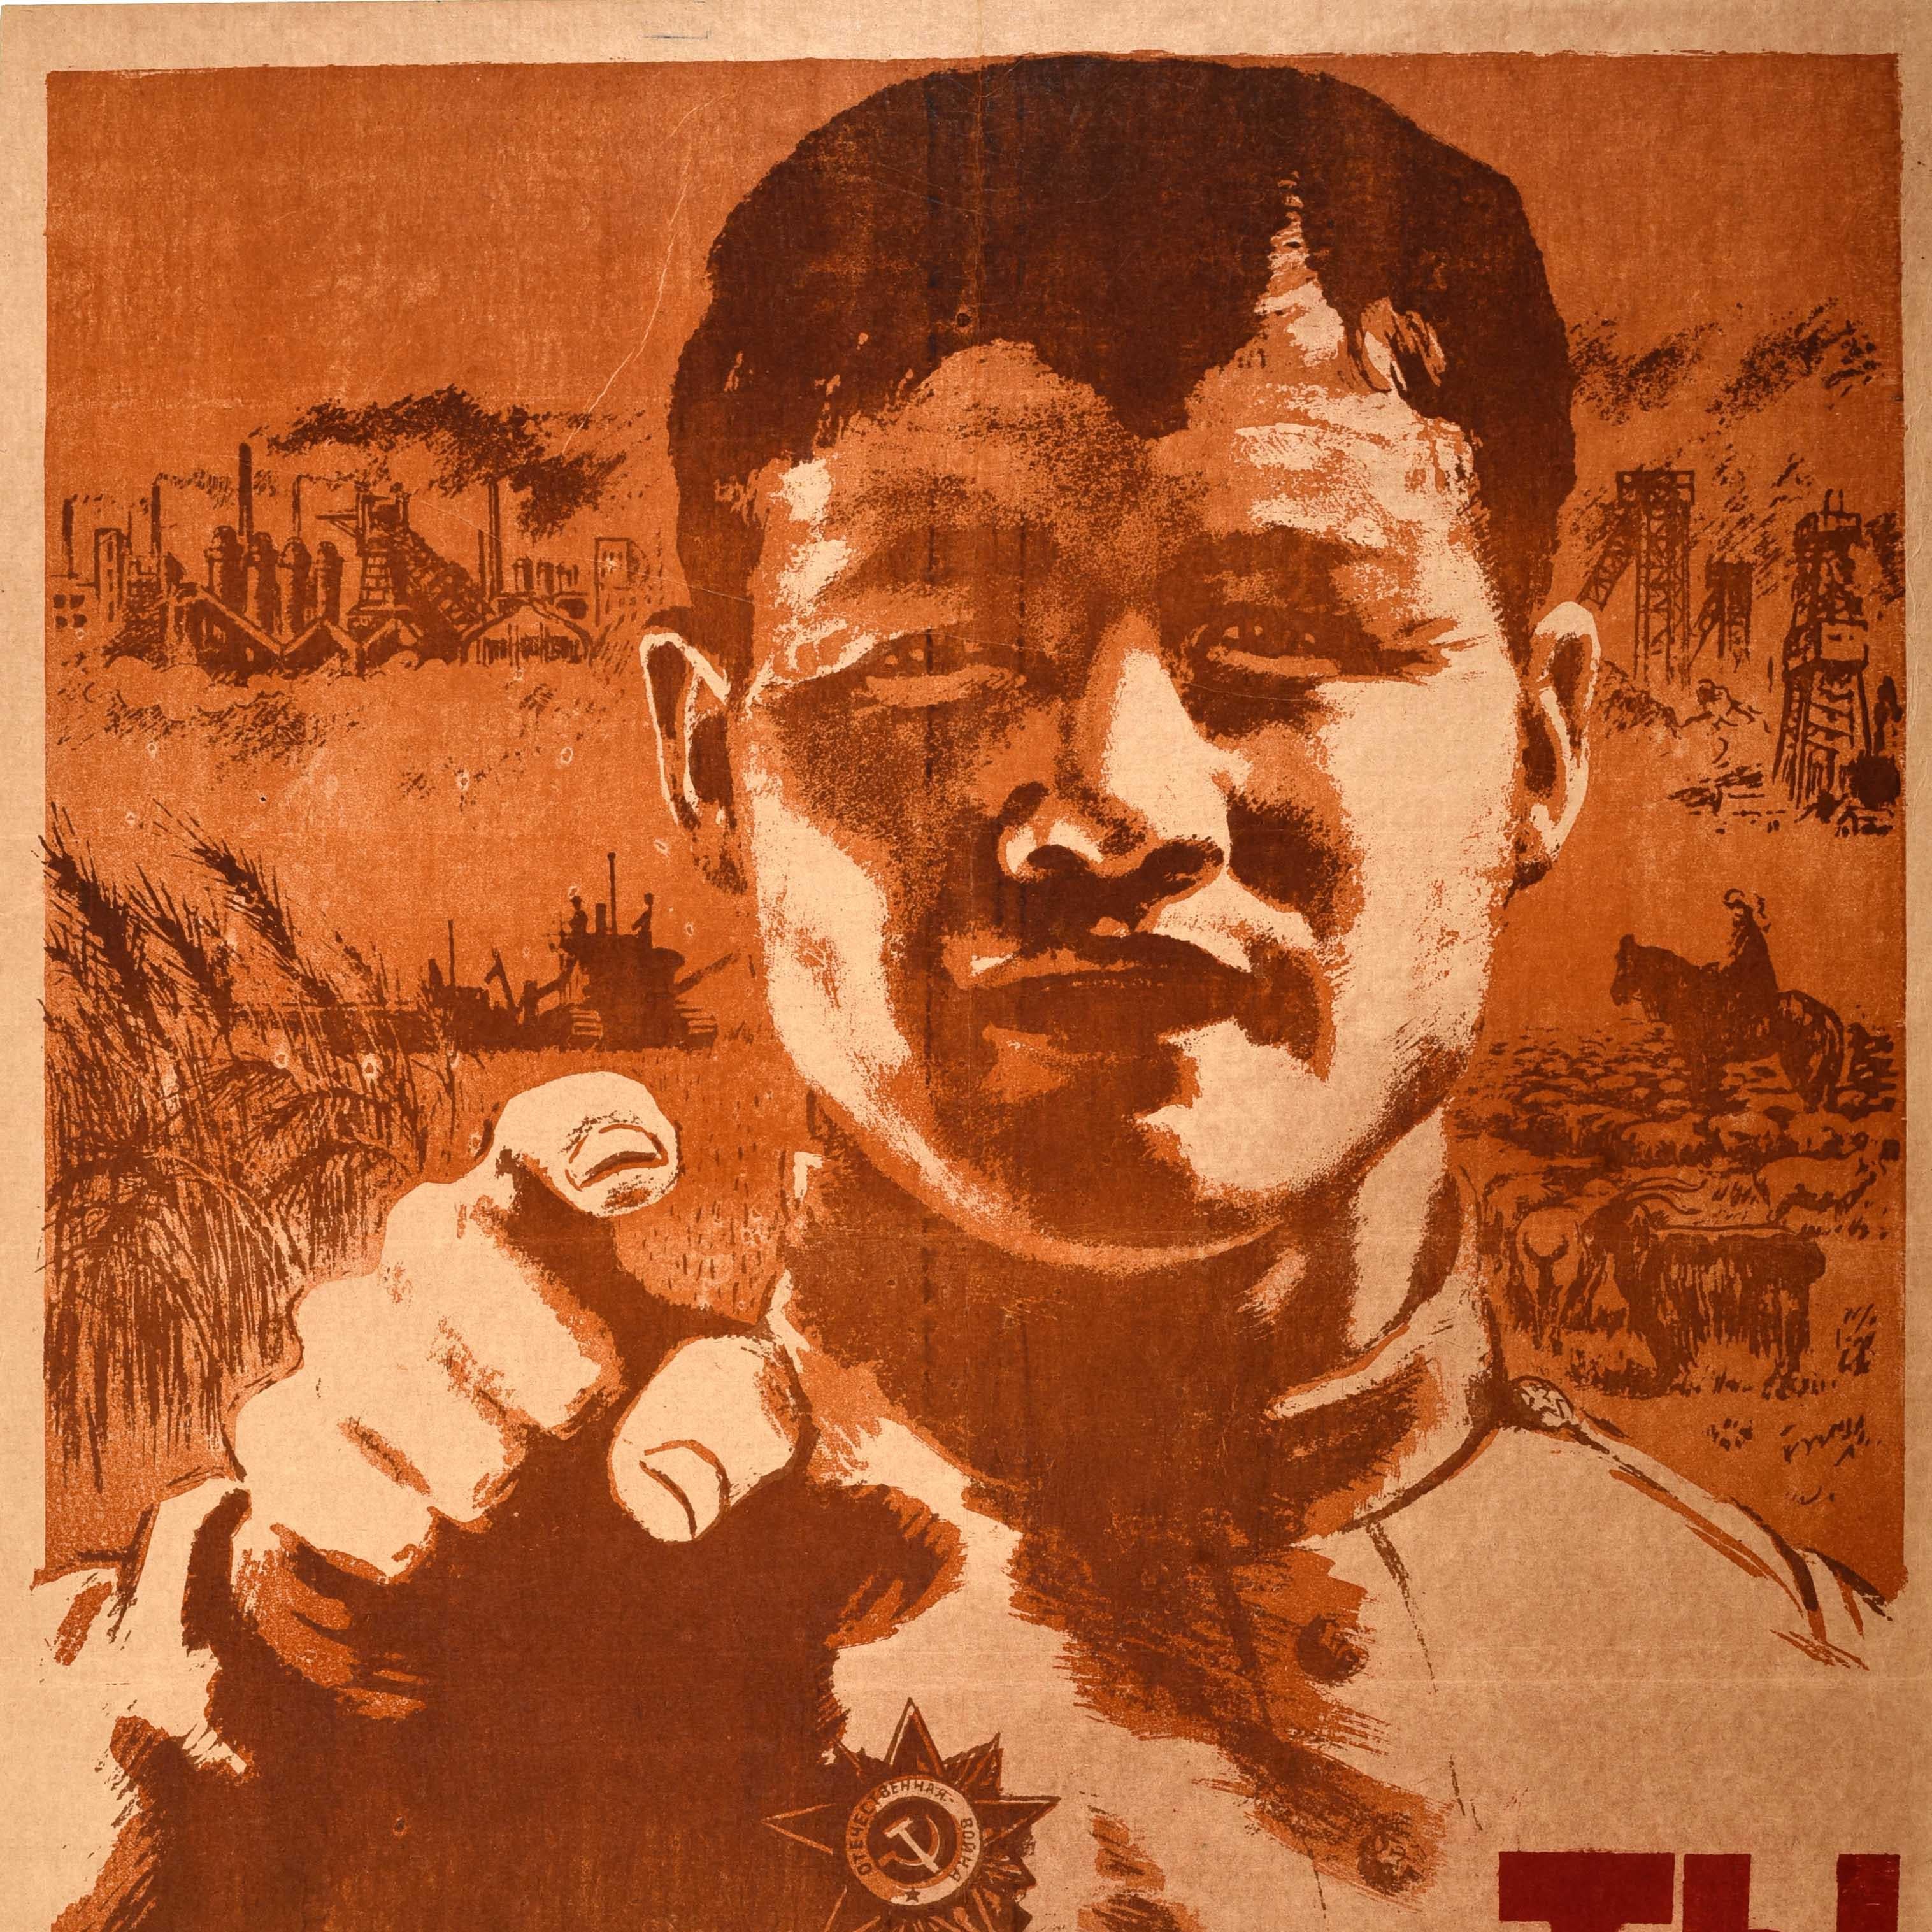 Original vintage Soviet propaganda poster - Do you fulfill your obligations in honour of the 25th anniversary of the Kazakh SSR? - featuring an army soldier in military uniform pointing at the viewer with agricultural and industrial images including